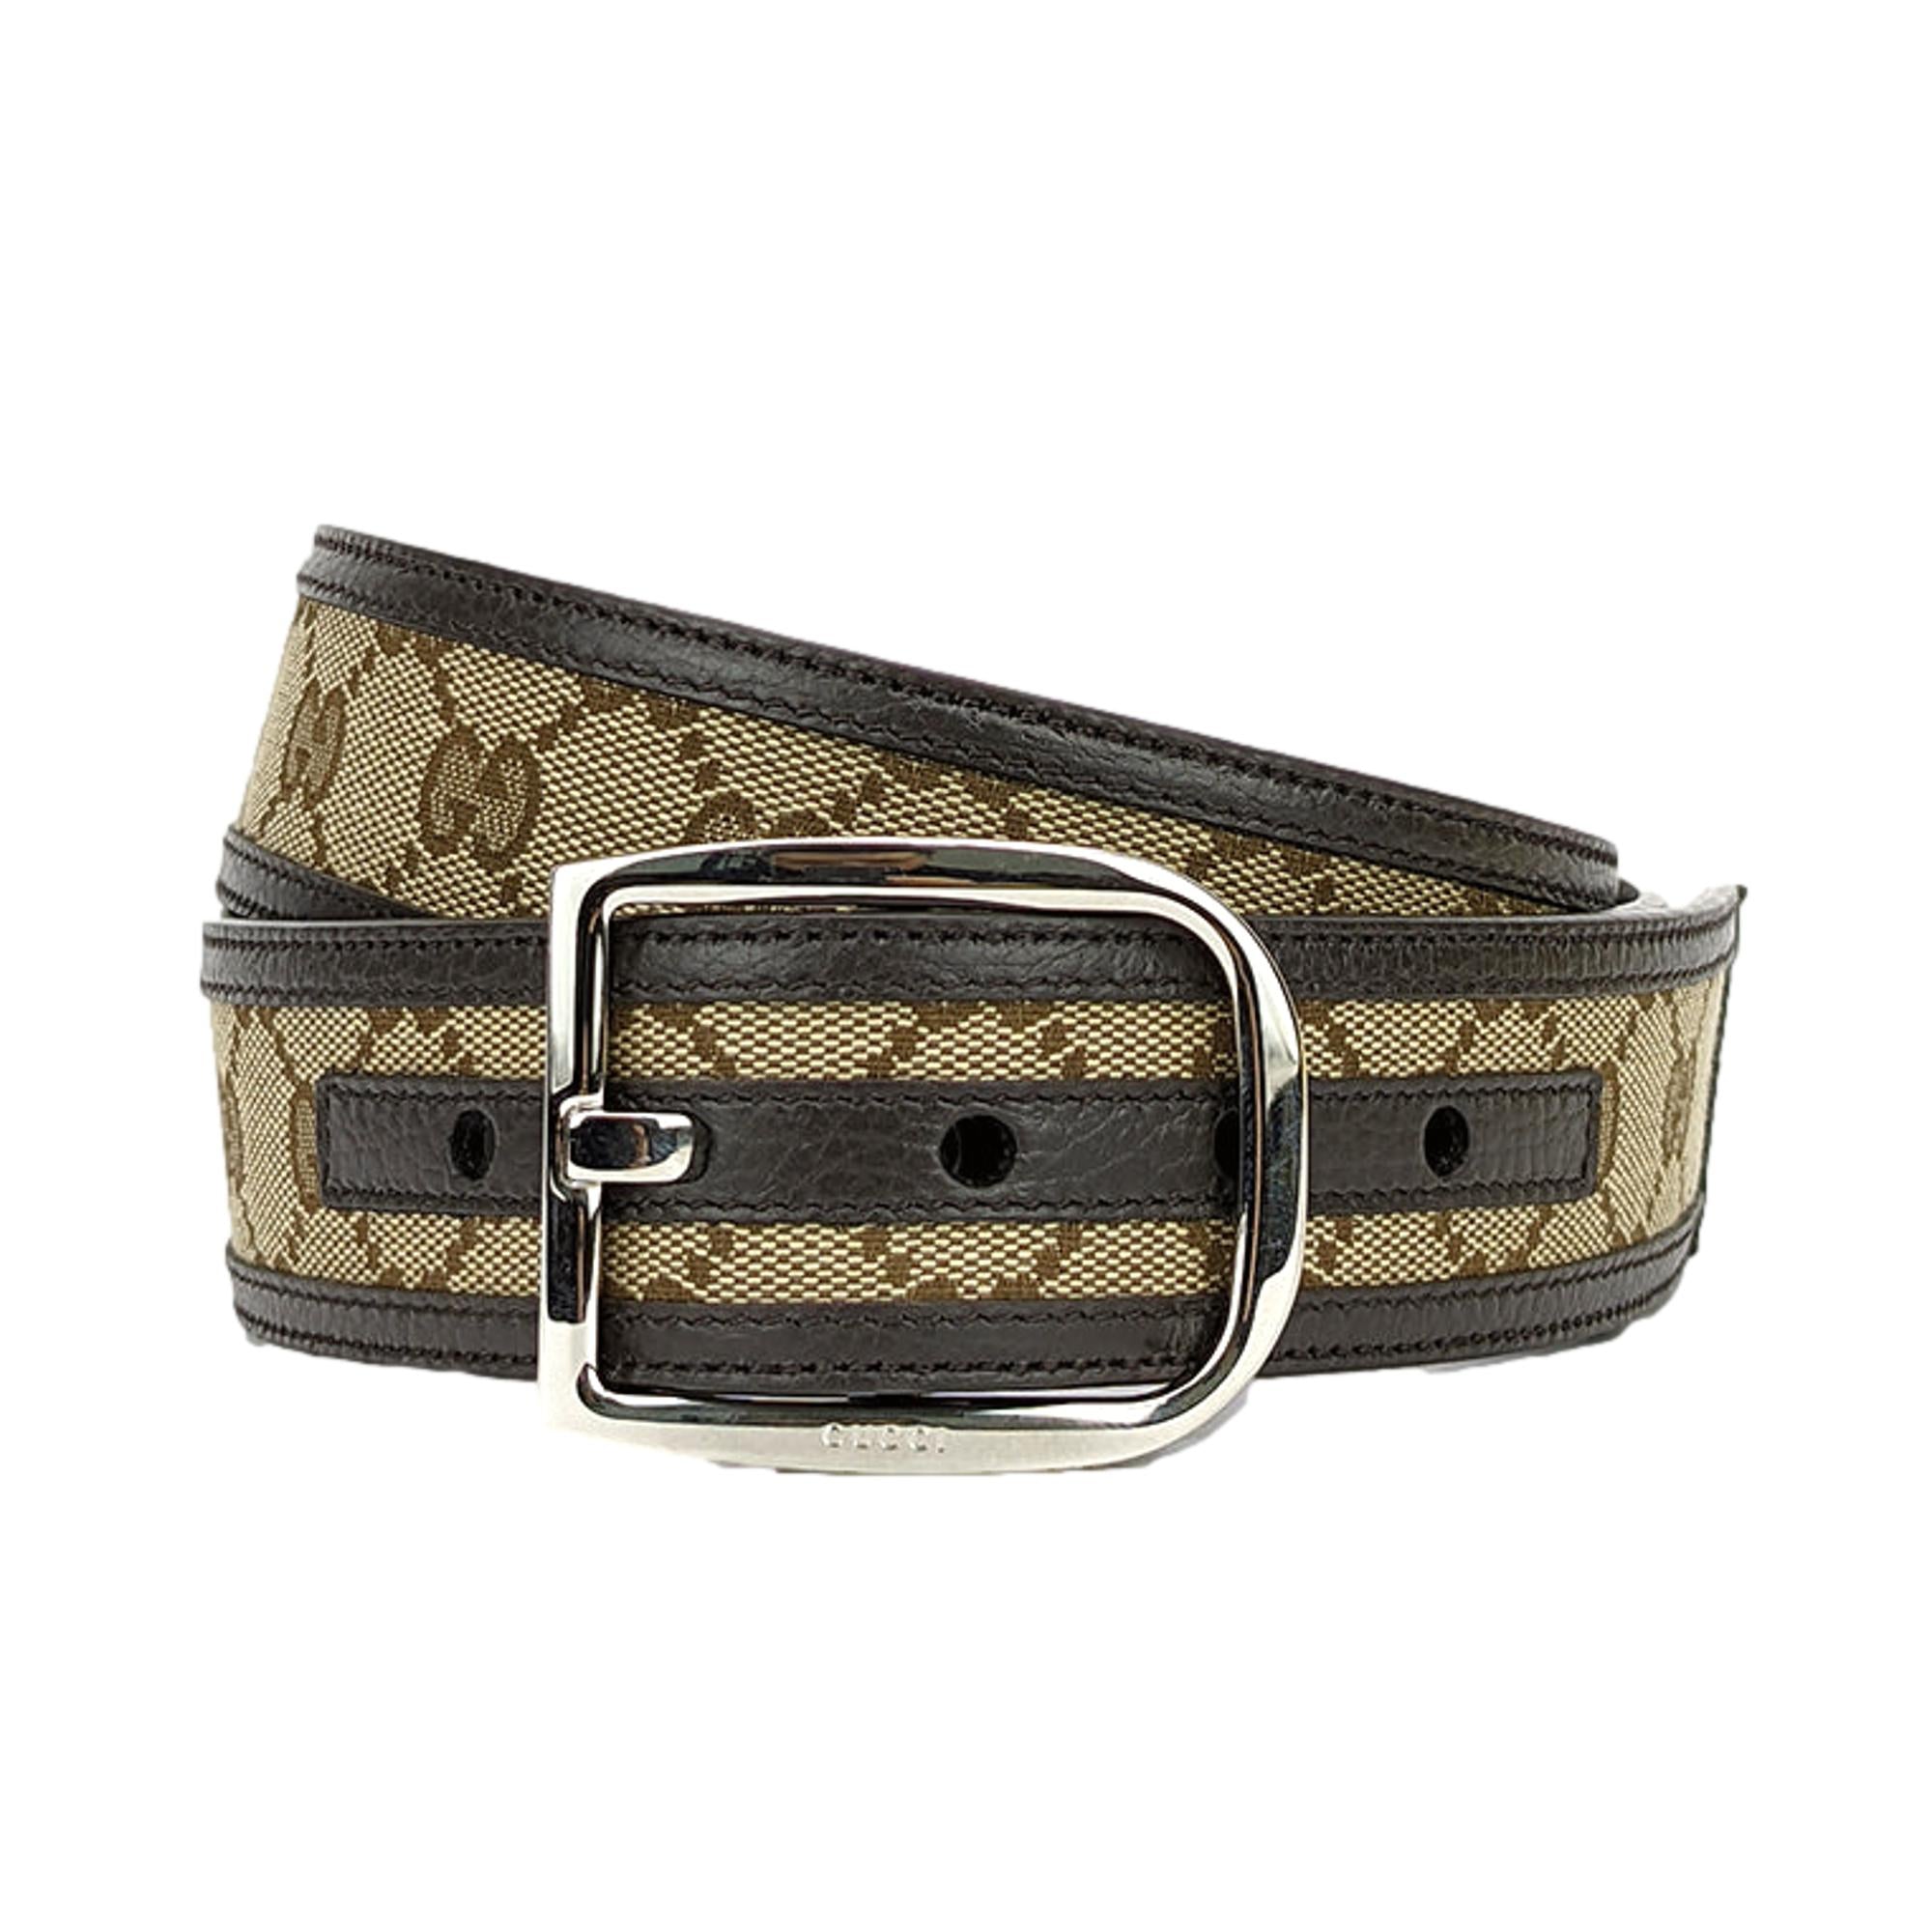 Gucci Guccisssima Brown and Beige Canvas Leather Trim Belt Size 36/90 at_Queen_Bee_of_Beverly_Hills